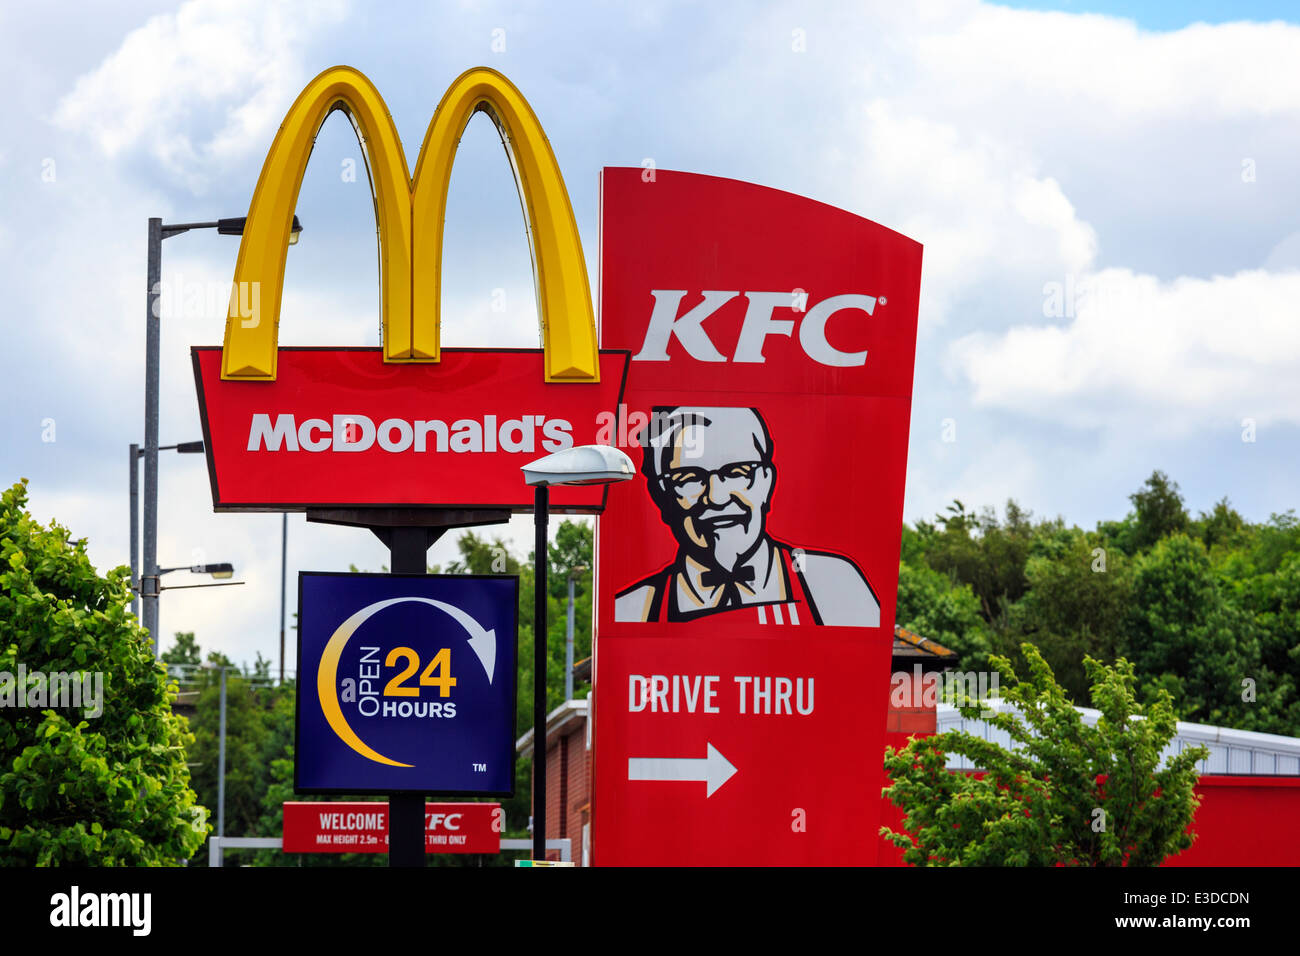 sign for McDonalds and KFC fast food outlets Stock Photo